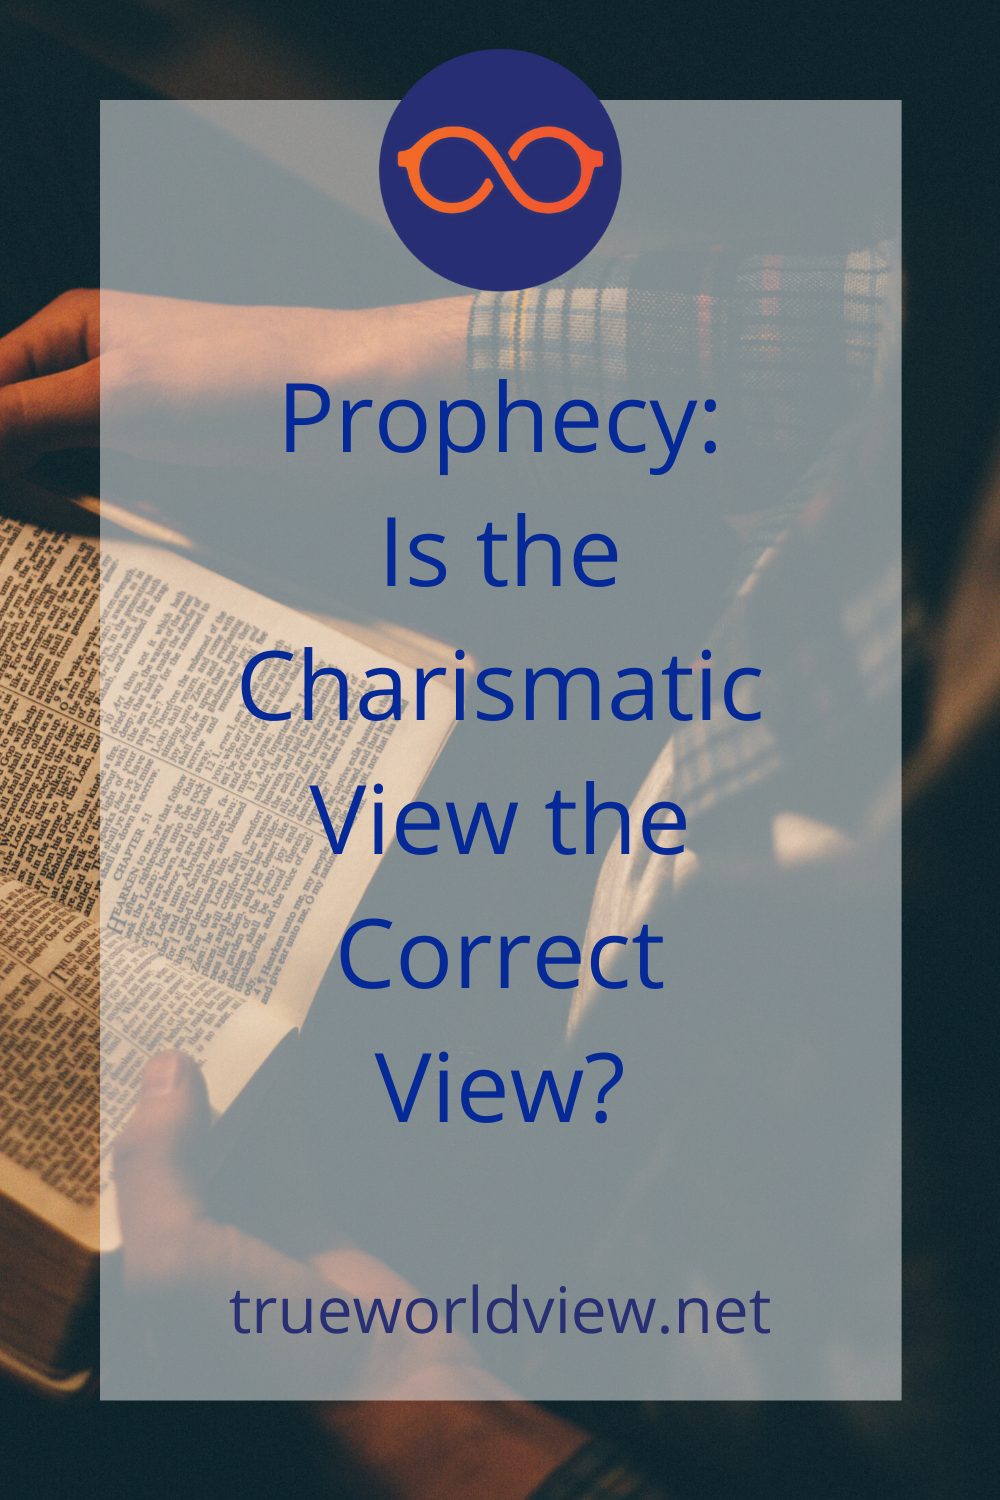 Prophecy: Is the Charismatic View the Correct View?